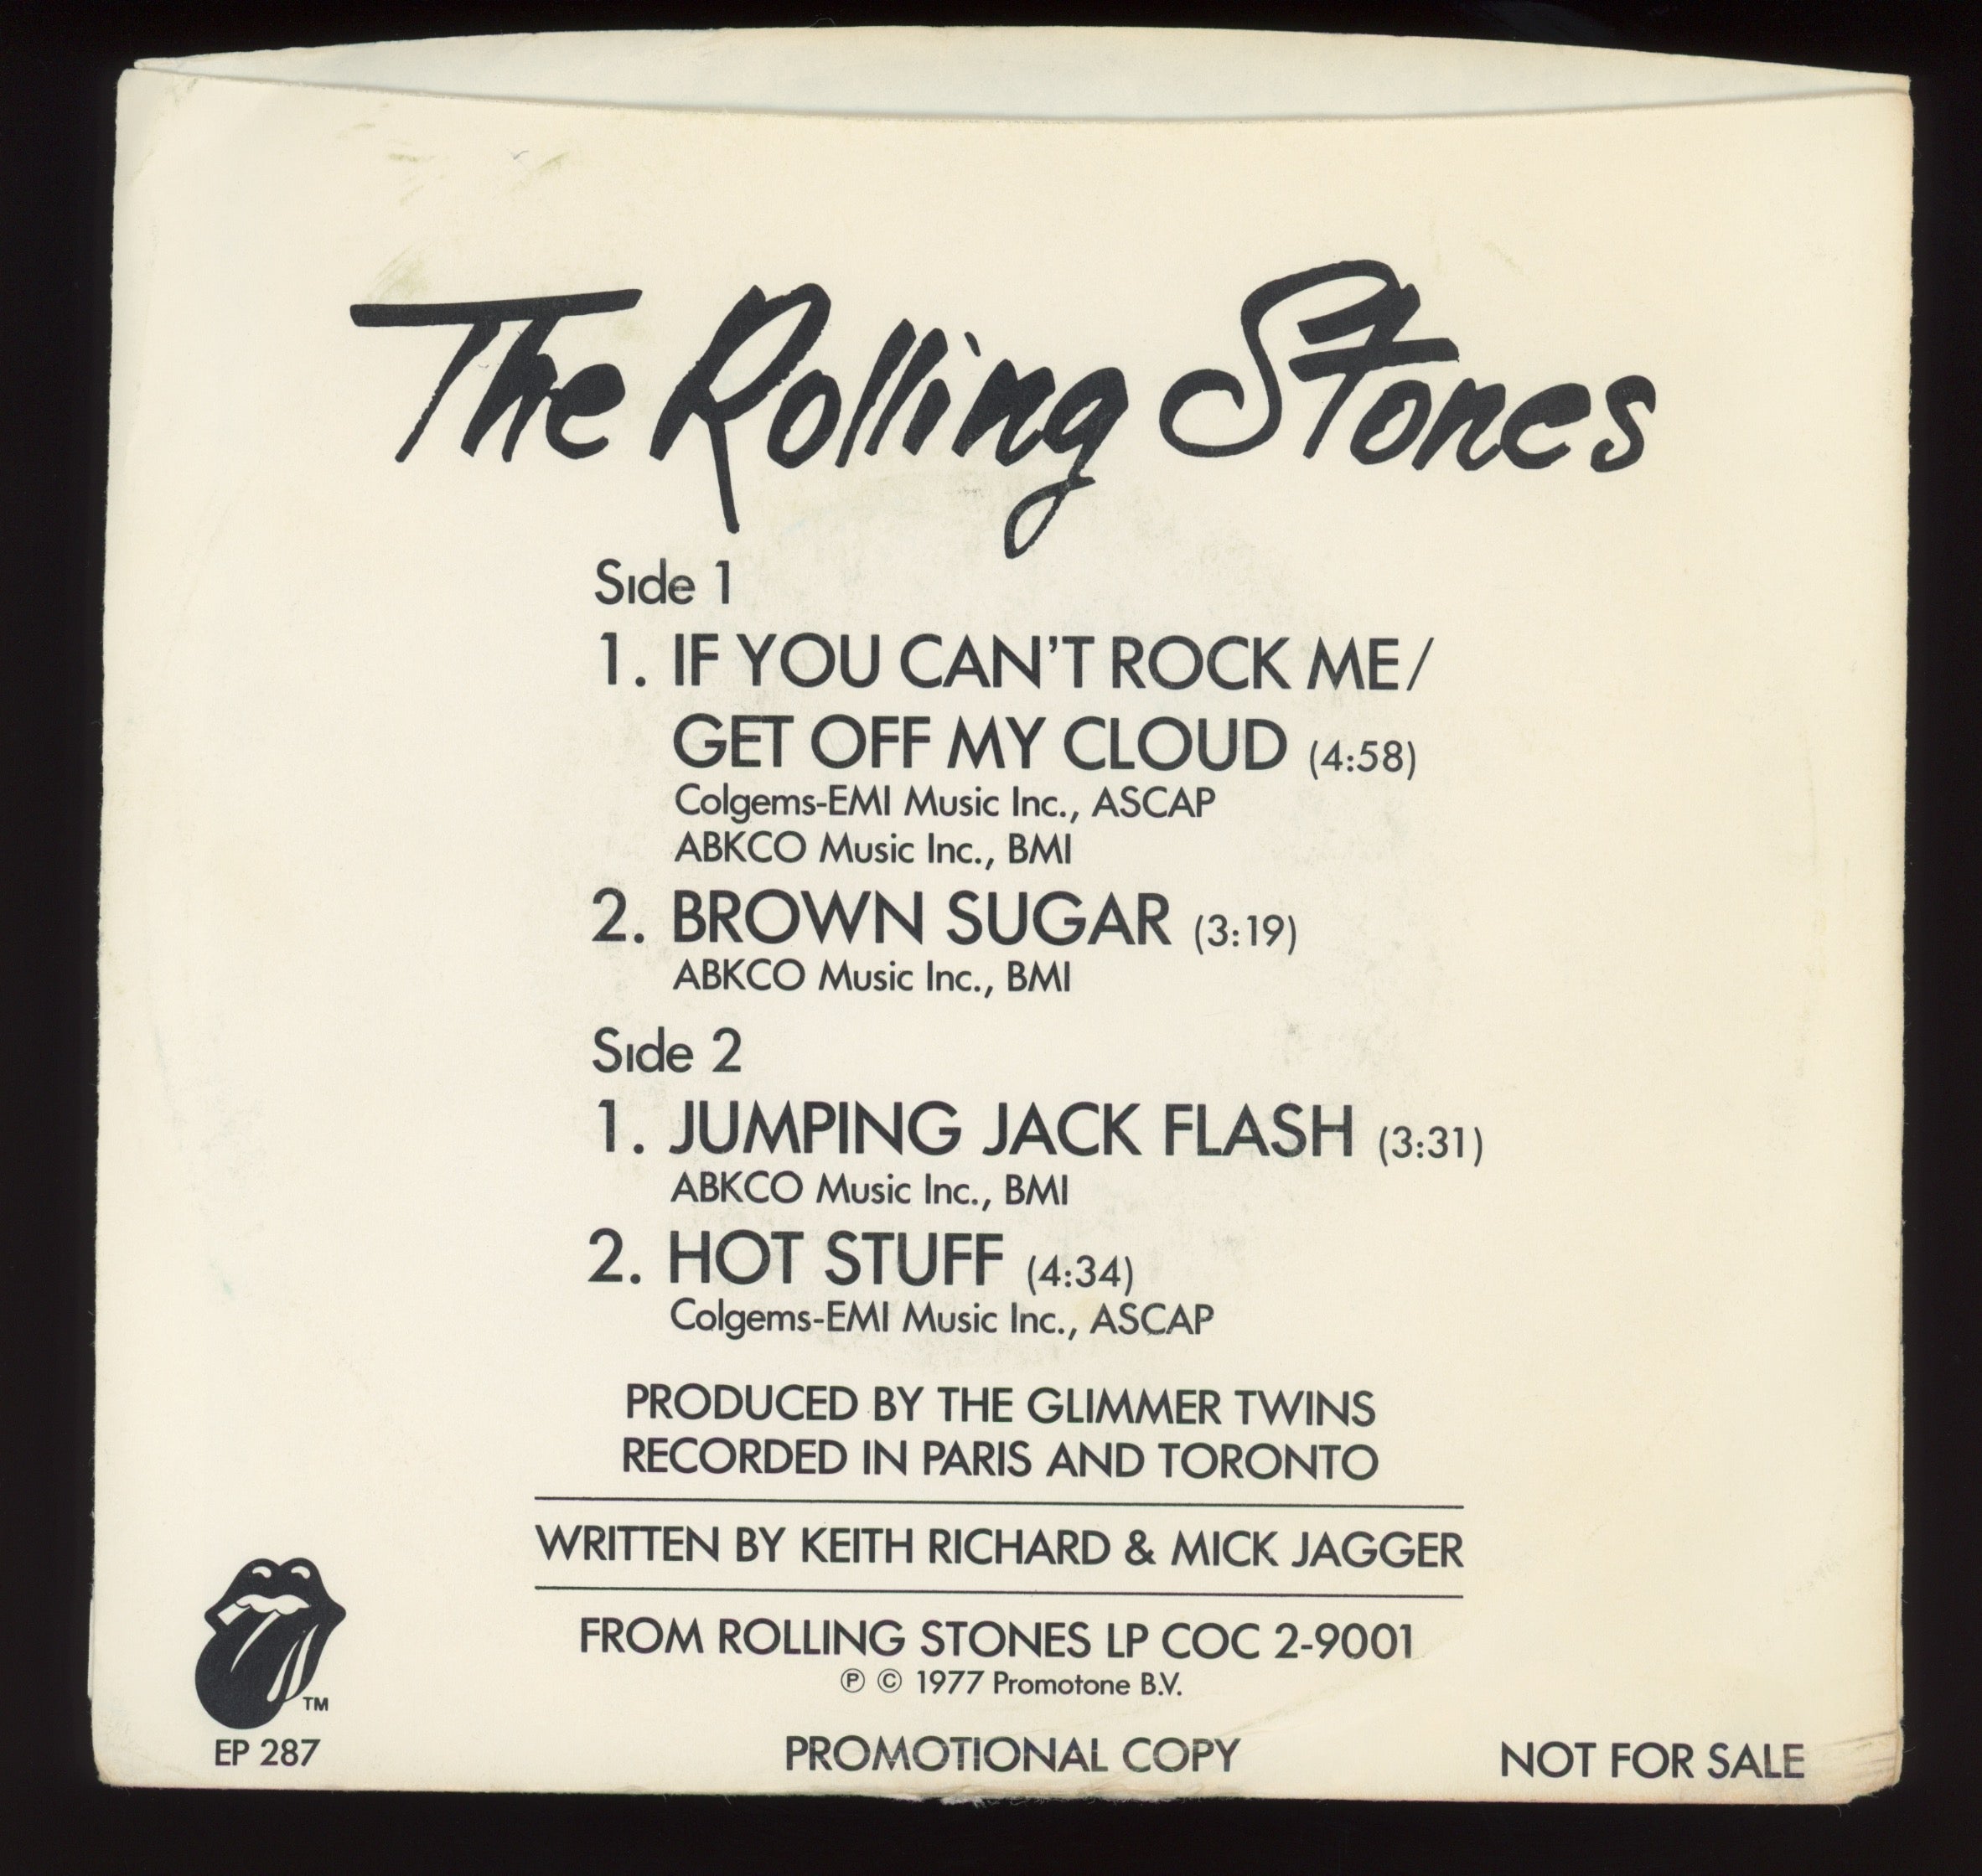 The Rolling Stones -  Rare Promo EP Sampler from the Love You Live LP